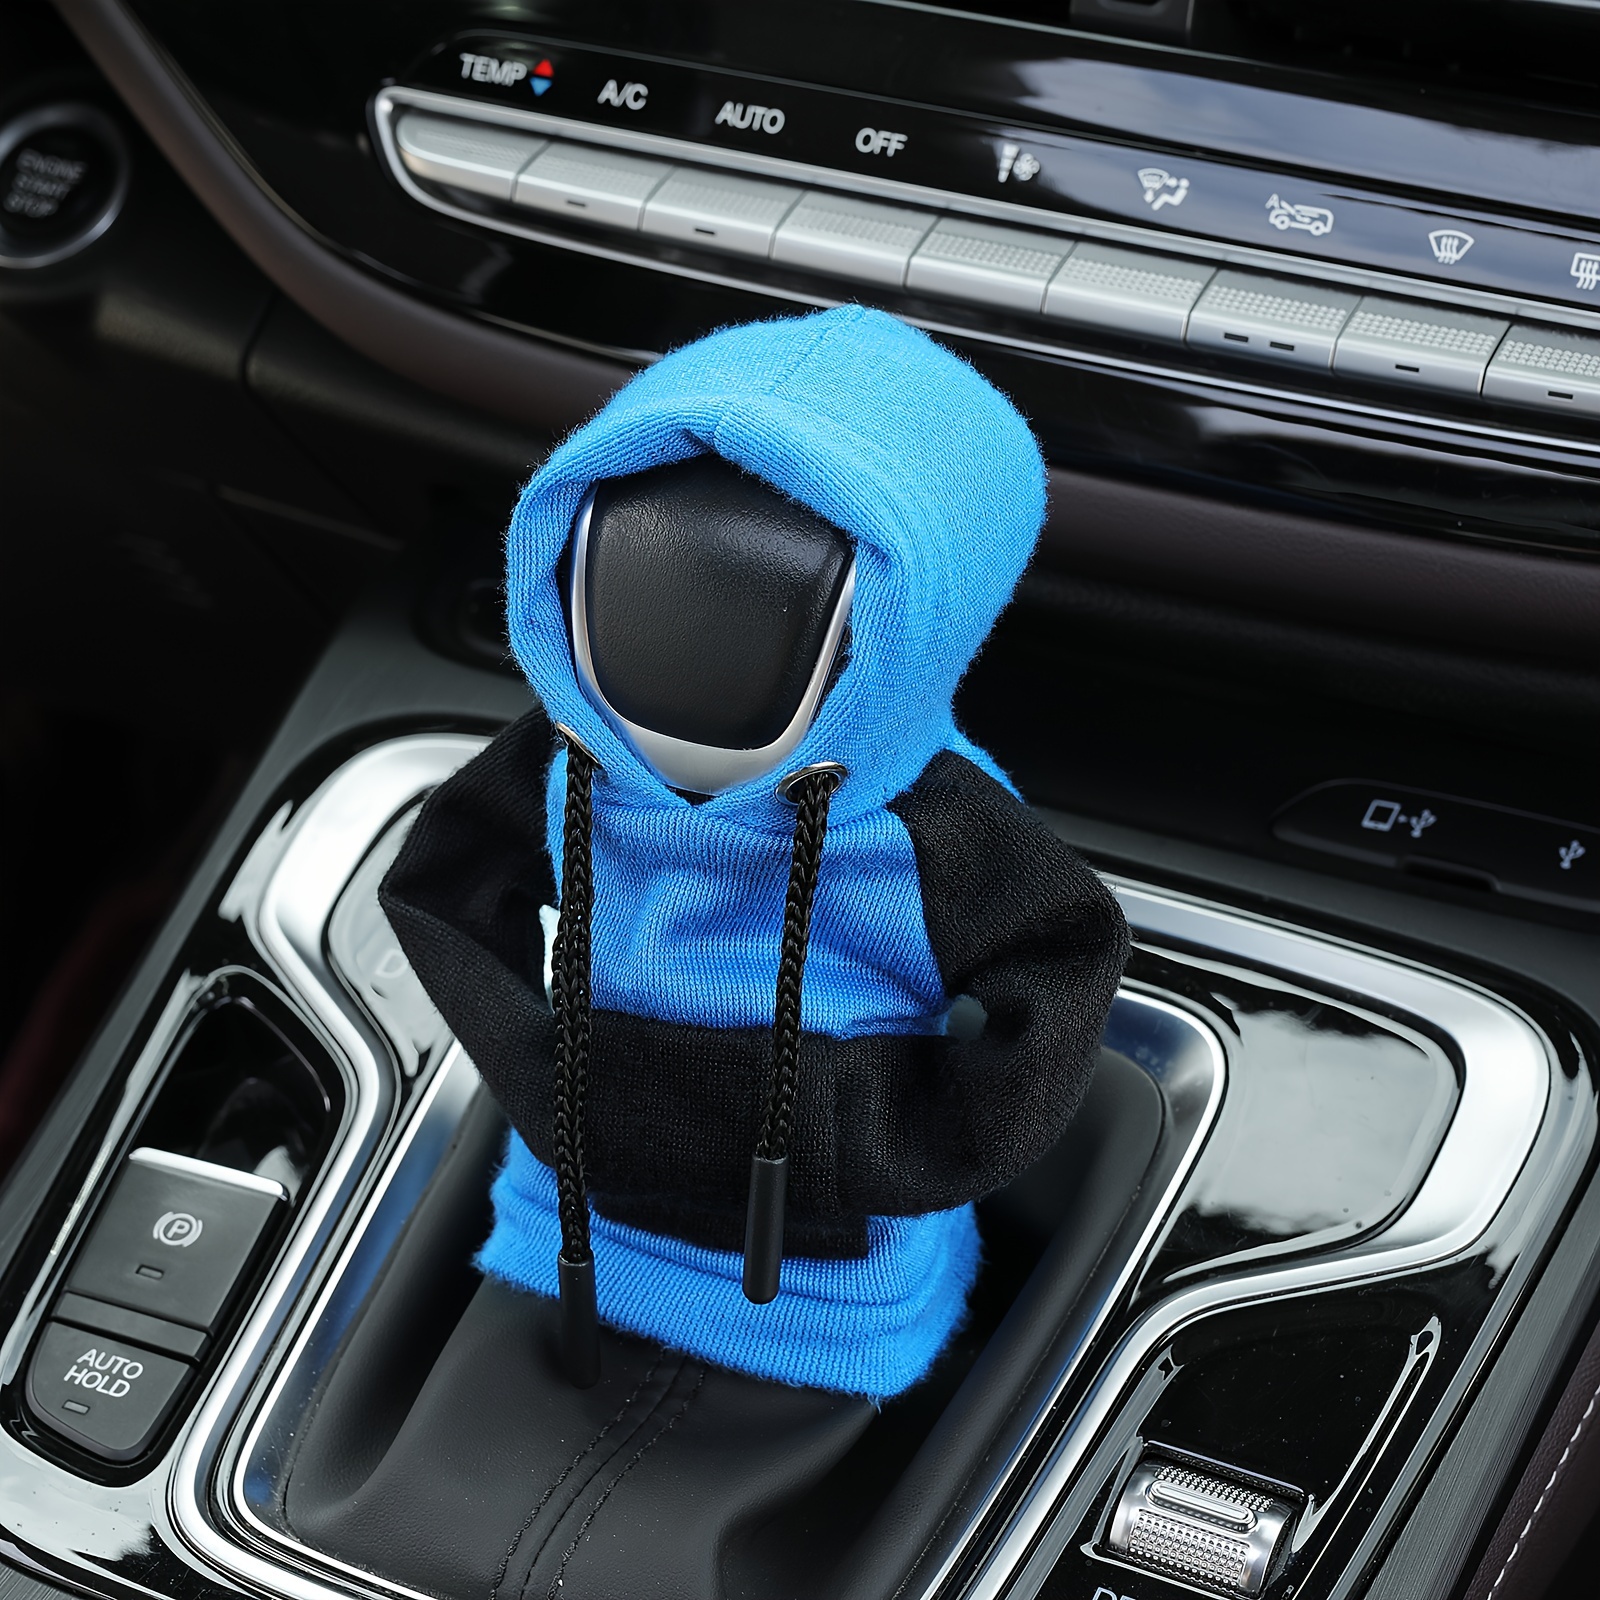 Large Size Universal Car Gear Shift Cover Hoodie, Hooded Sweatshirt for Auto Gear Stick Shifter Knob, Interior Accessories Decor Christmas Gifts